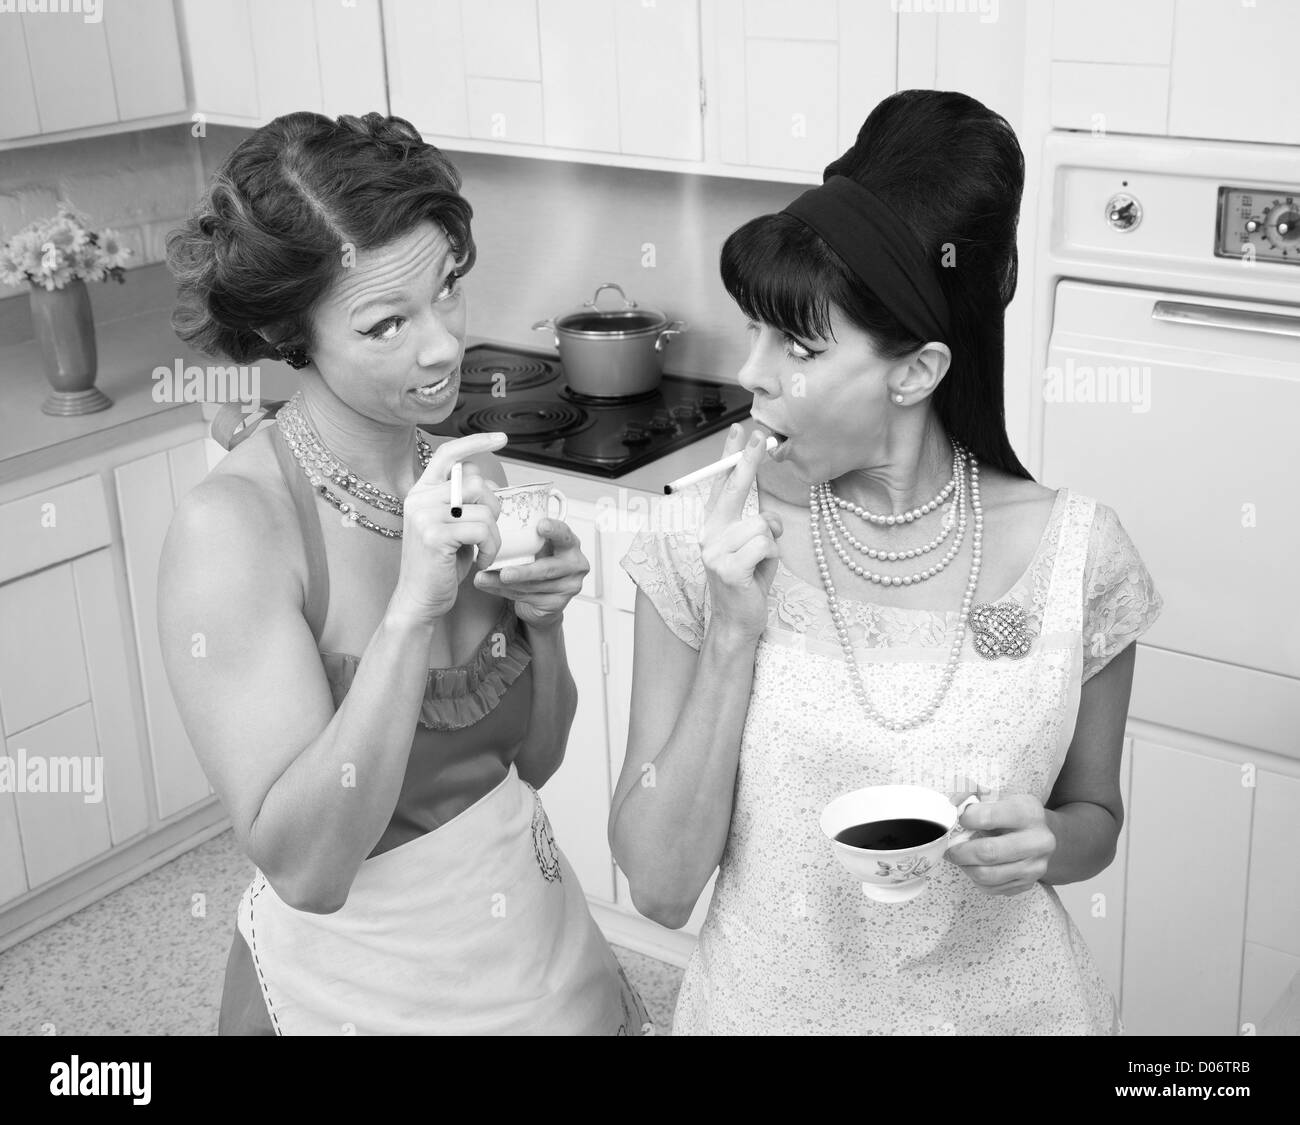 Gossping women smoking and drinking tea in a retro-style kitchen Stock Photo